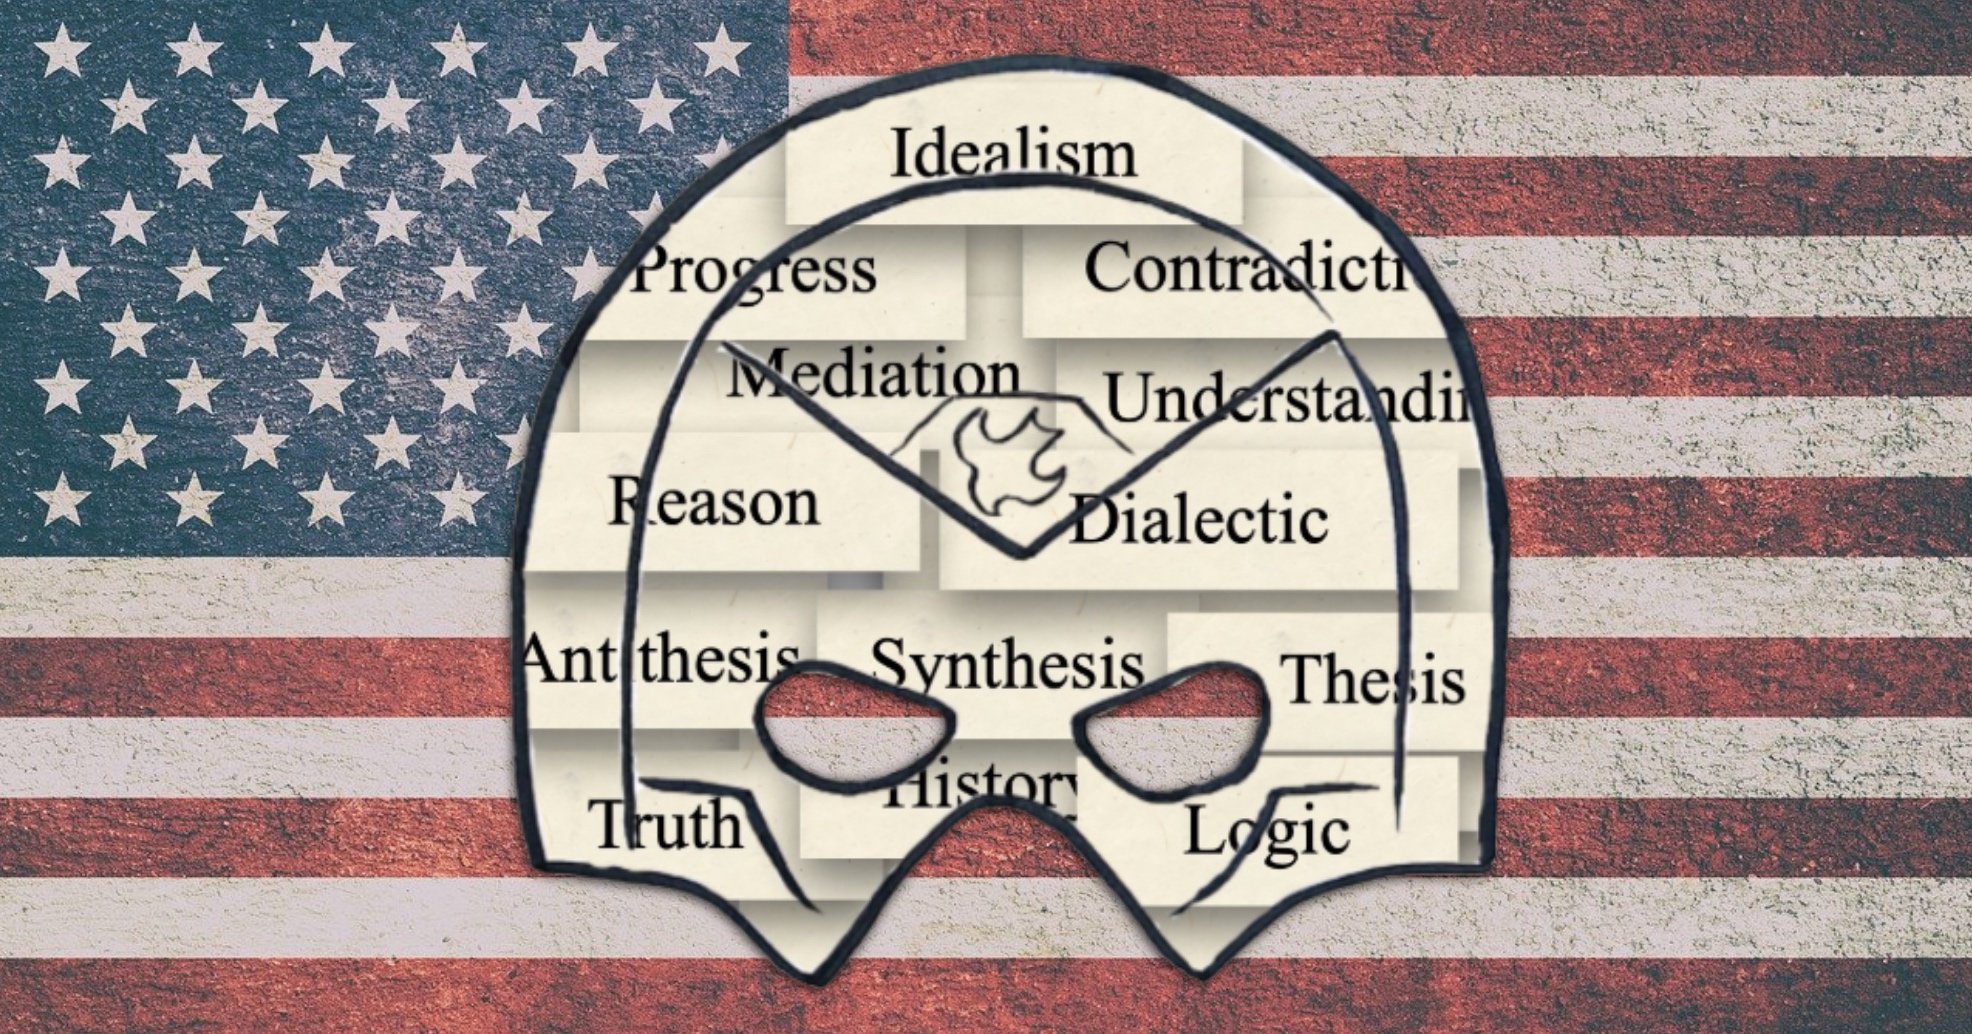 Image of the Peacemaker helmet logo on an American flag